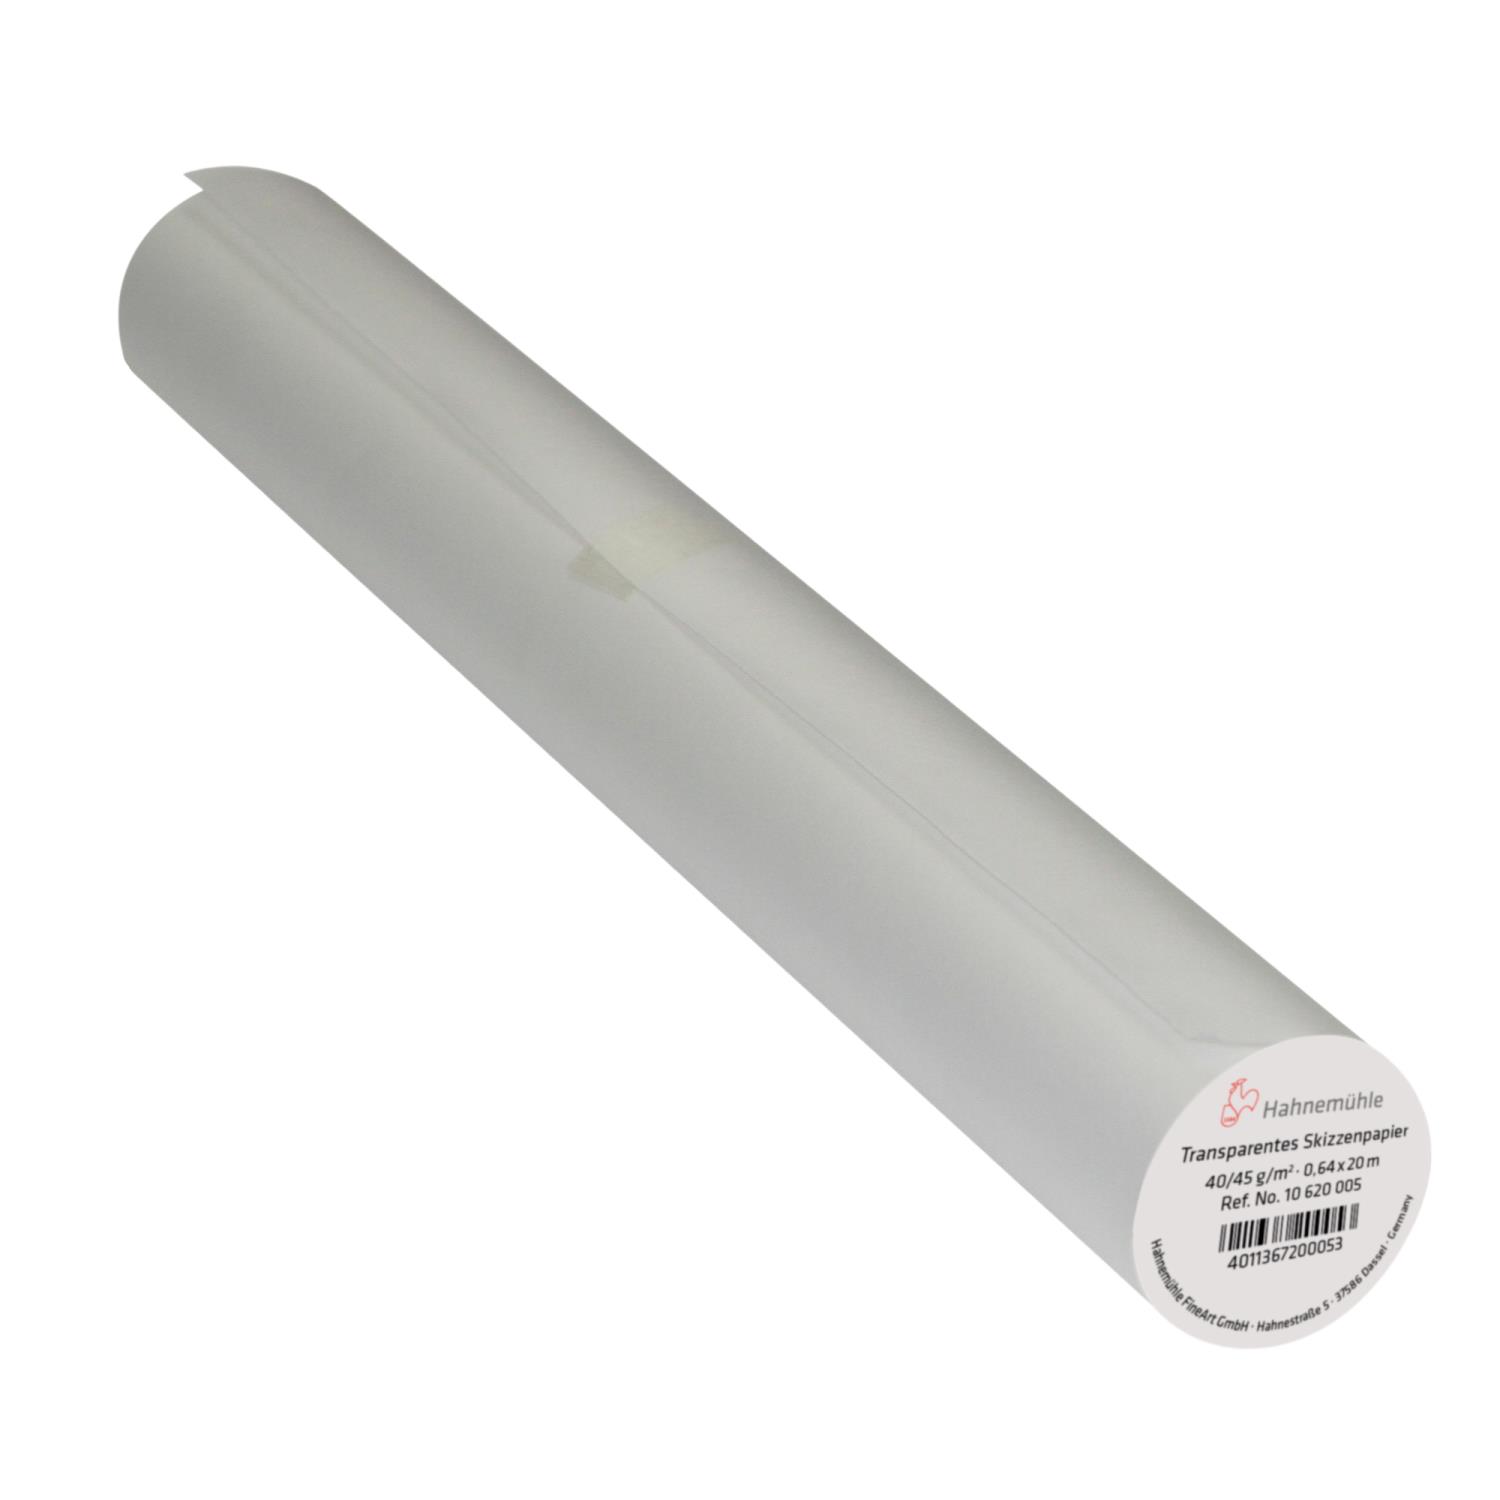 Hahnemühle Tracing Paper roll 40/45gr. 0,64x20m 620005